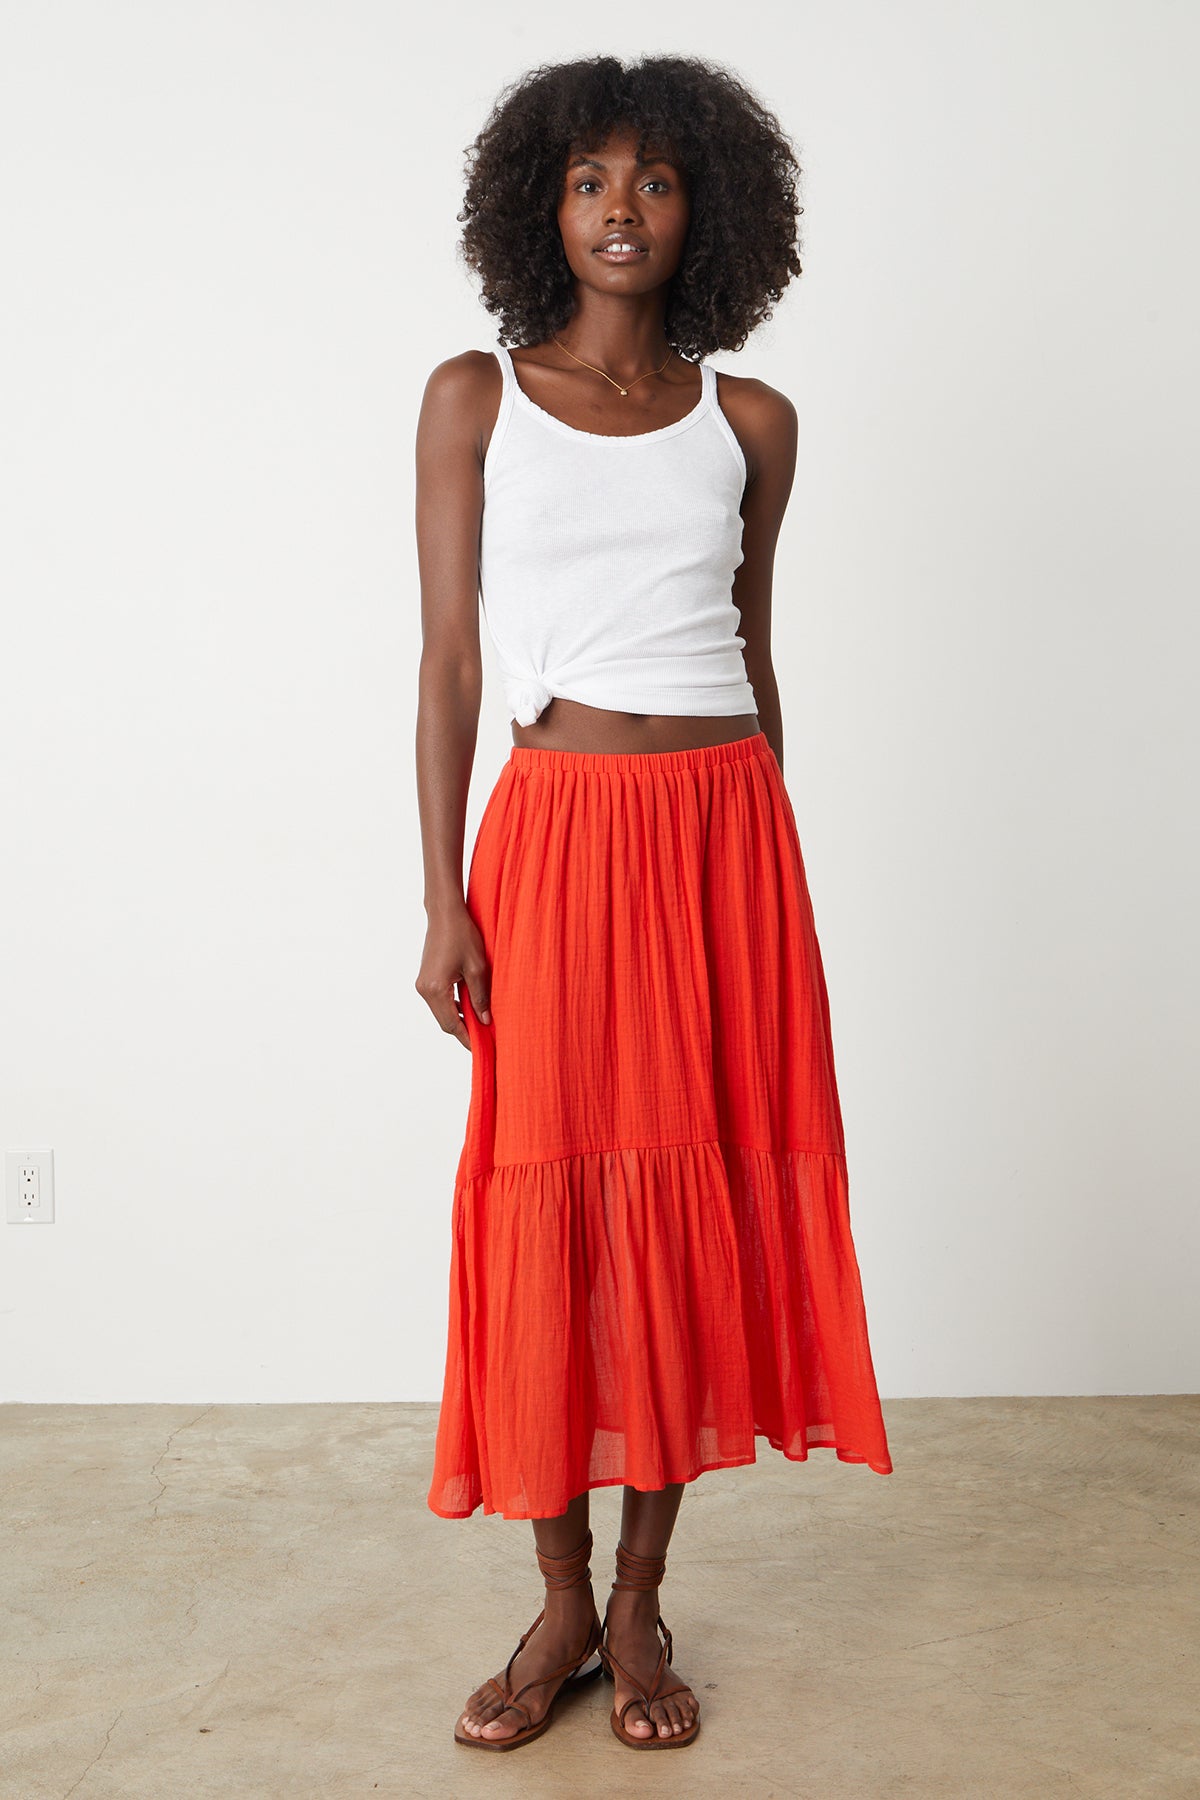 Mckenna Tiered Skirt in bright cardinal red with Aliza tank tied with knot to show waist full length front-26255713435841